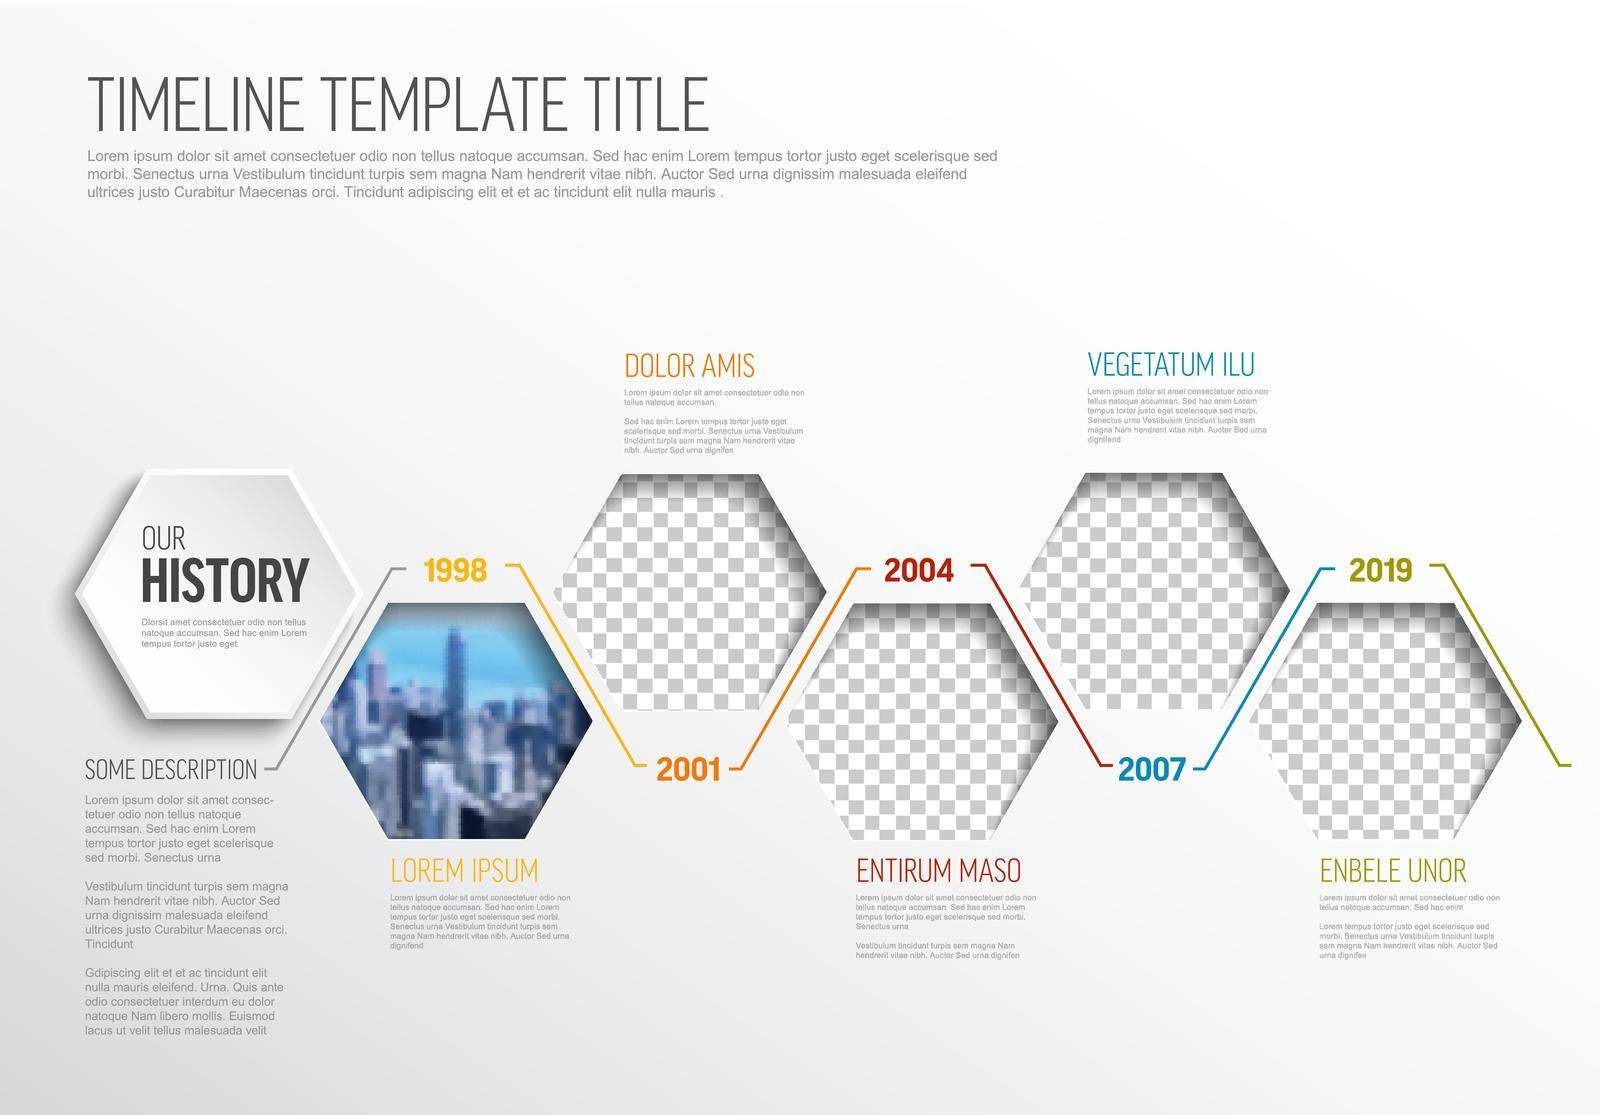 Infographic timeline template with photos in hexagons by orson